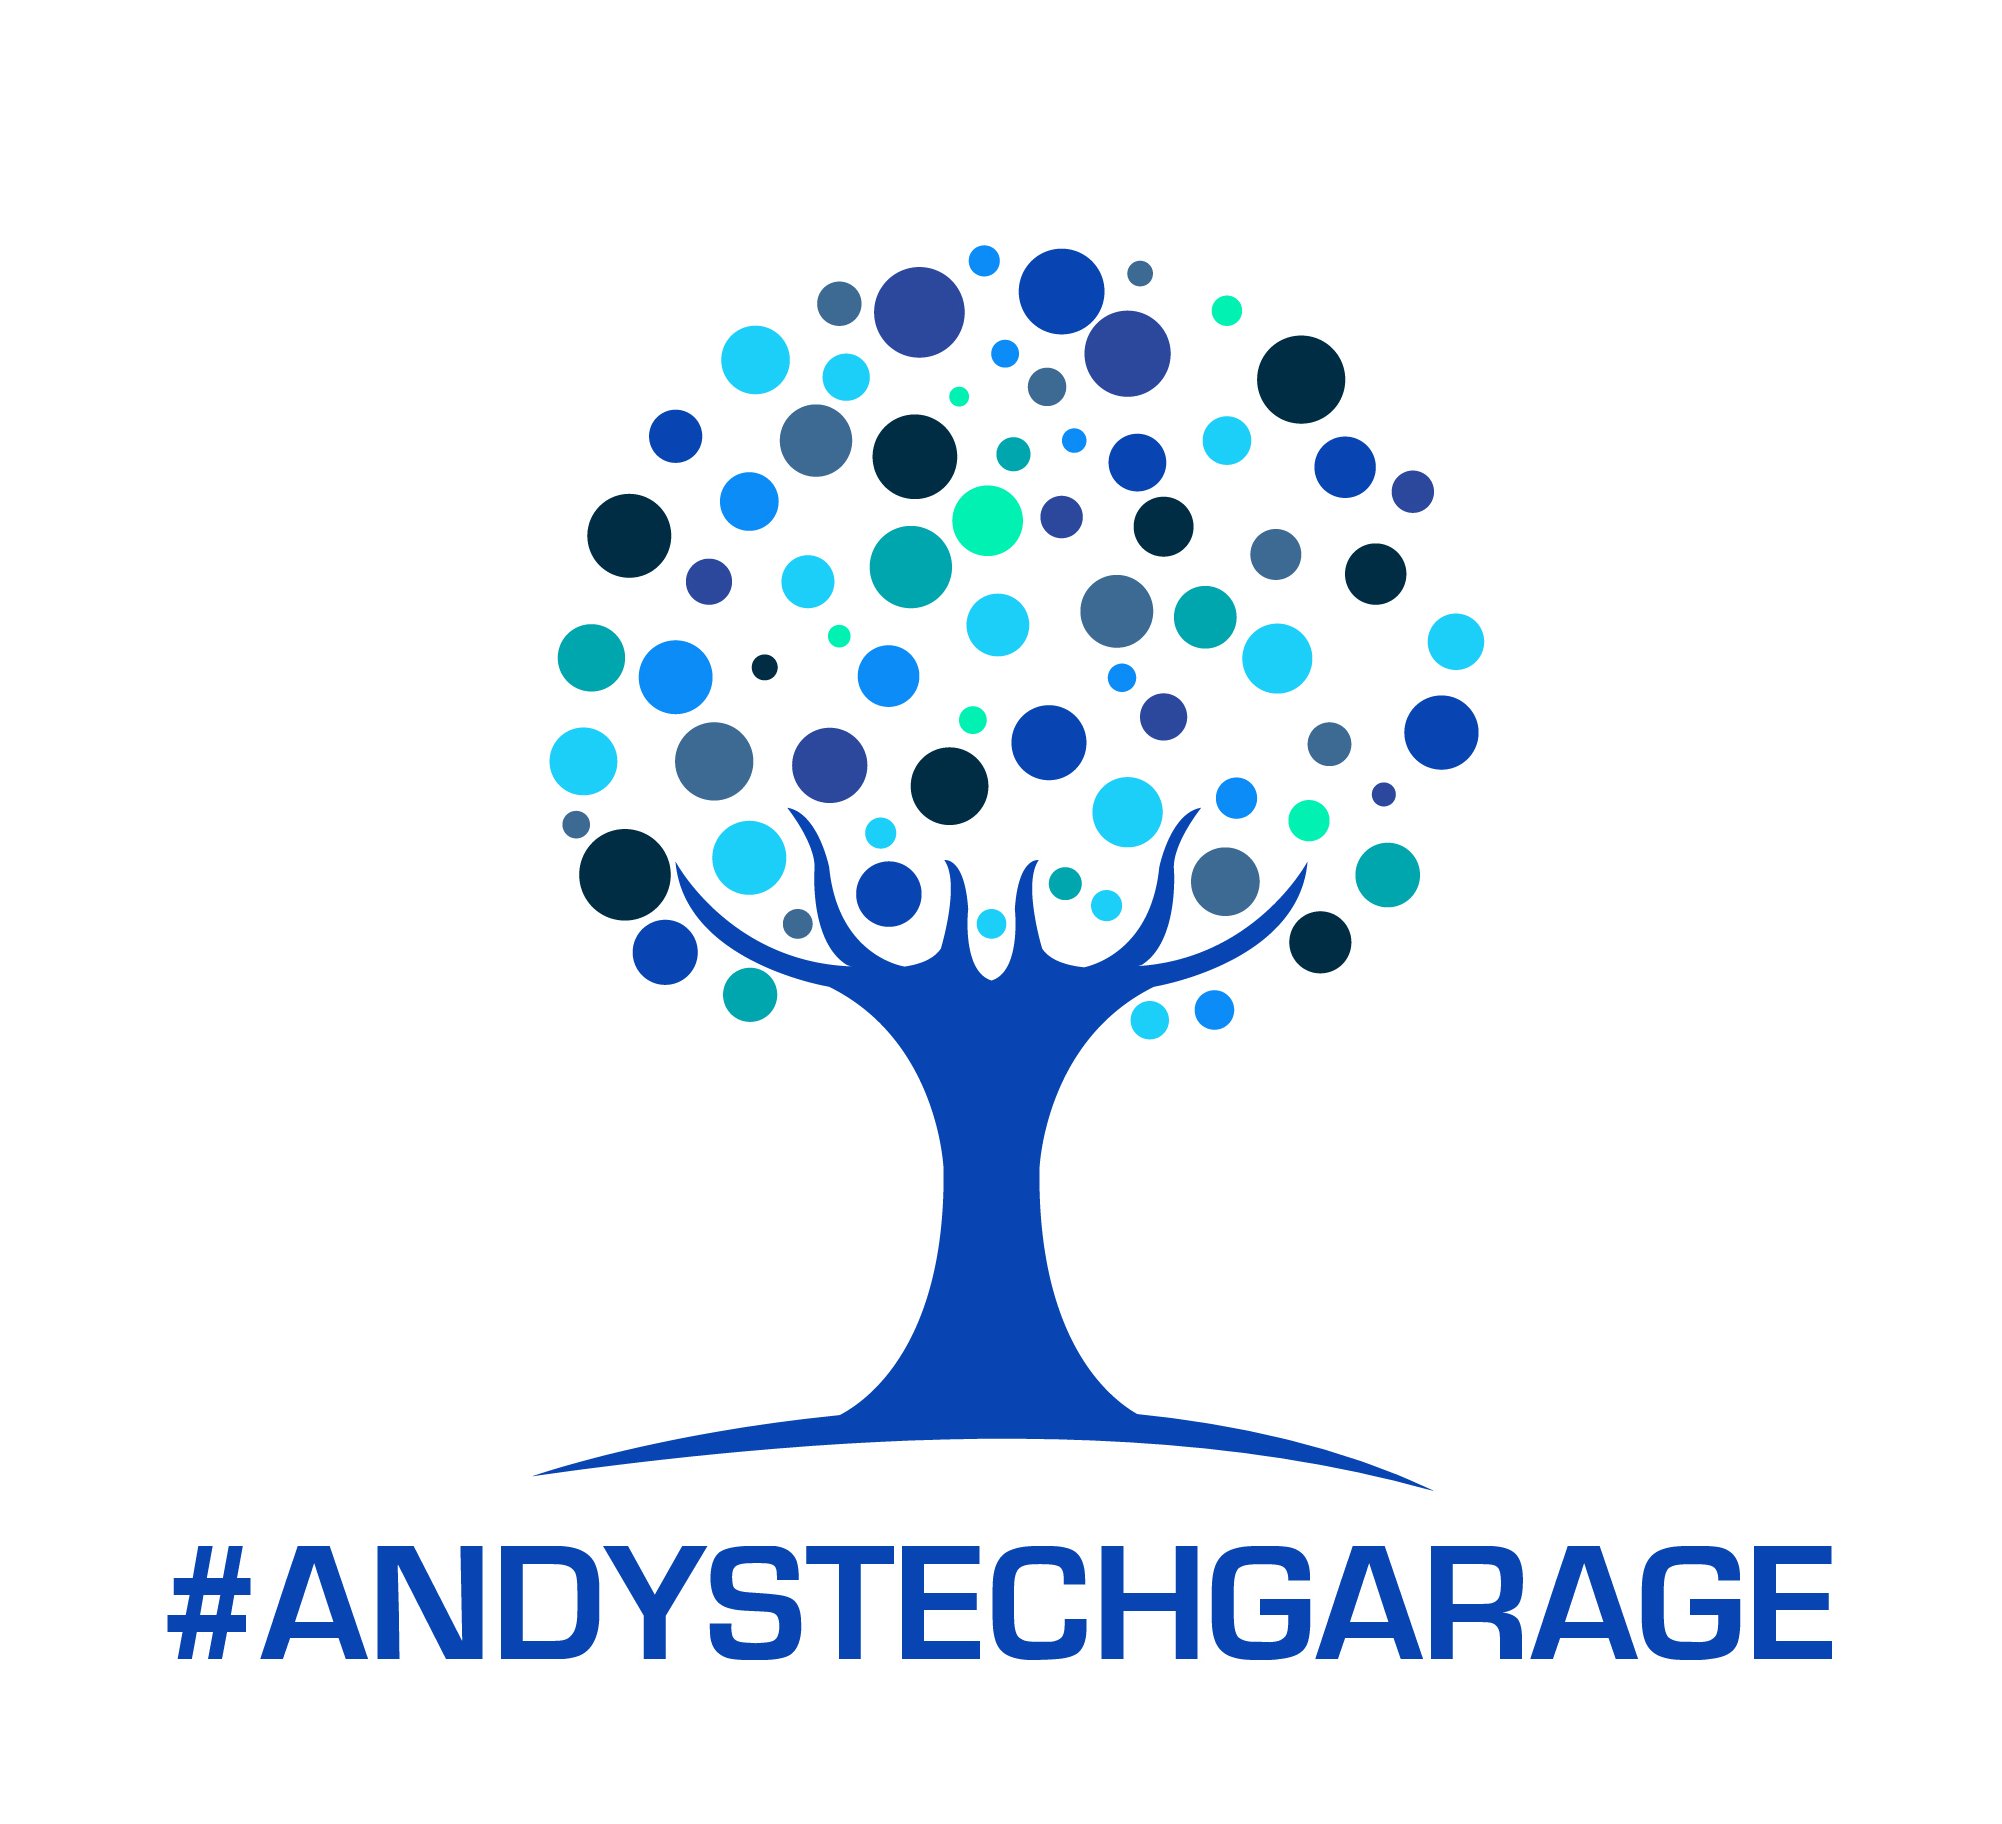 Andy is young and passionate about #space, #robots & #science. A true #maker, focuses on his project & gets it done. Please like & share his posts. Thank you